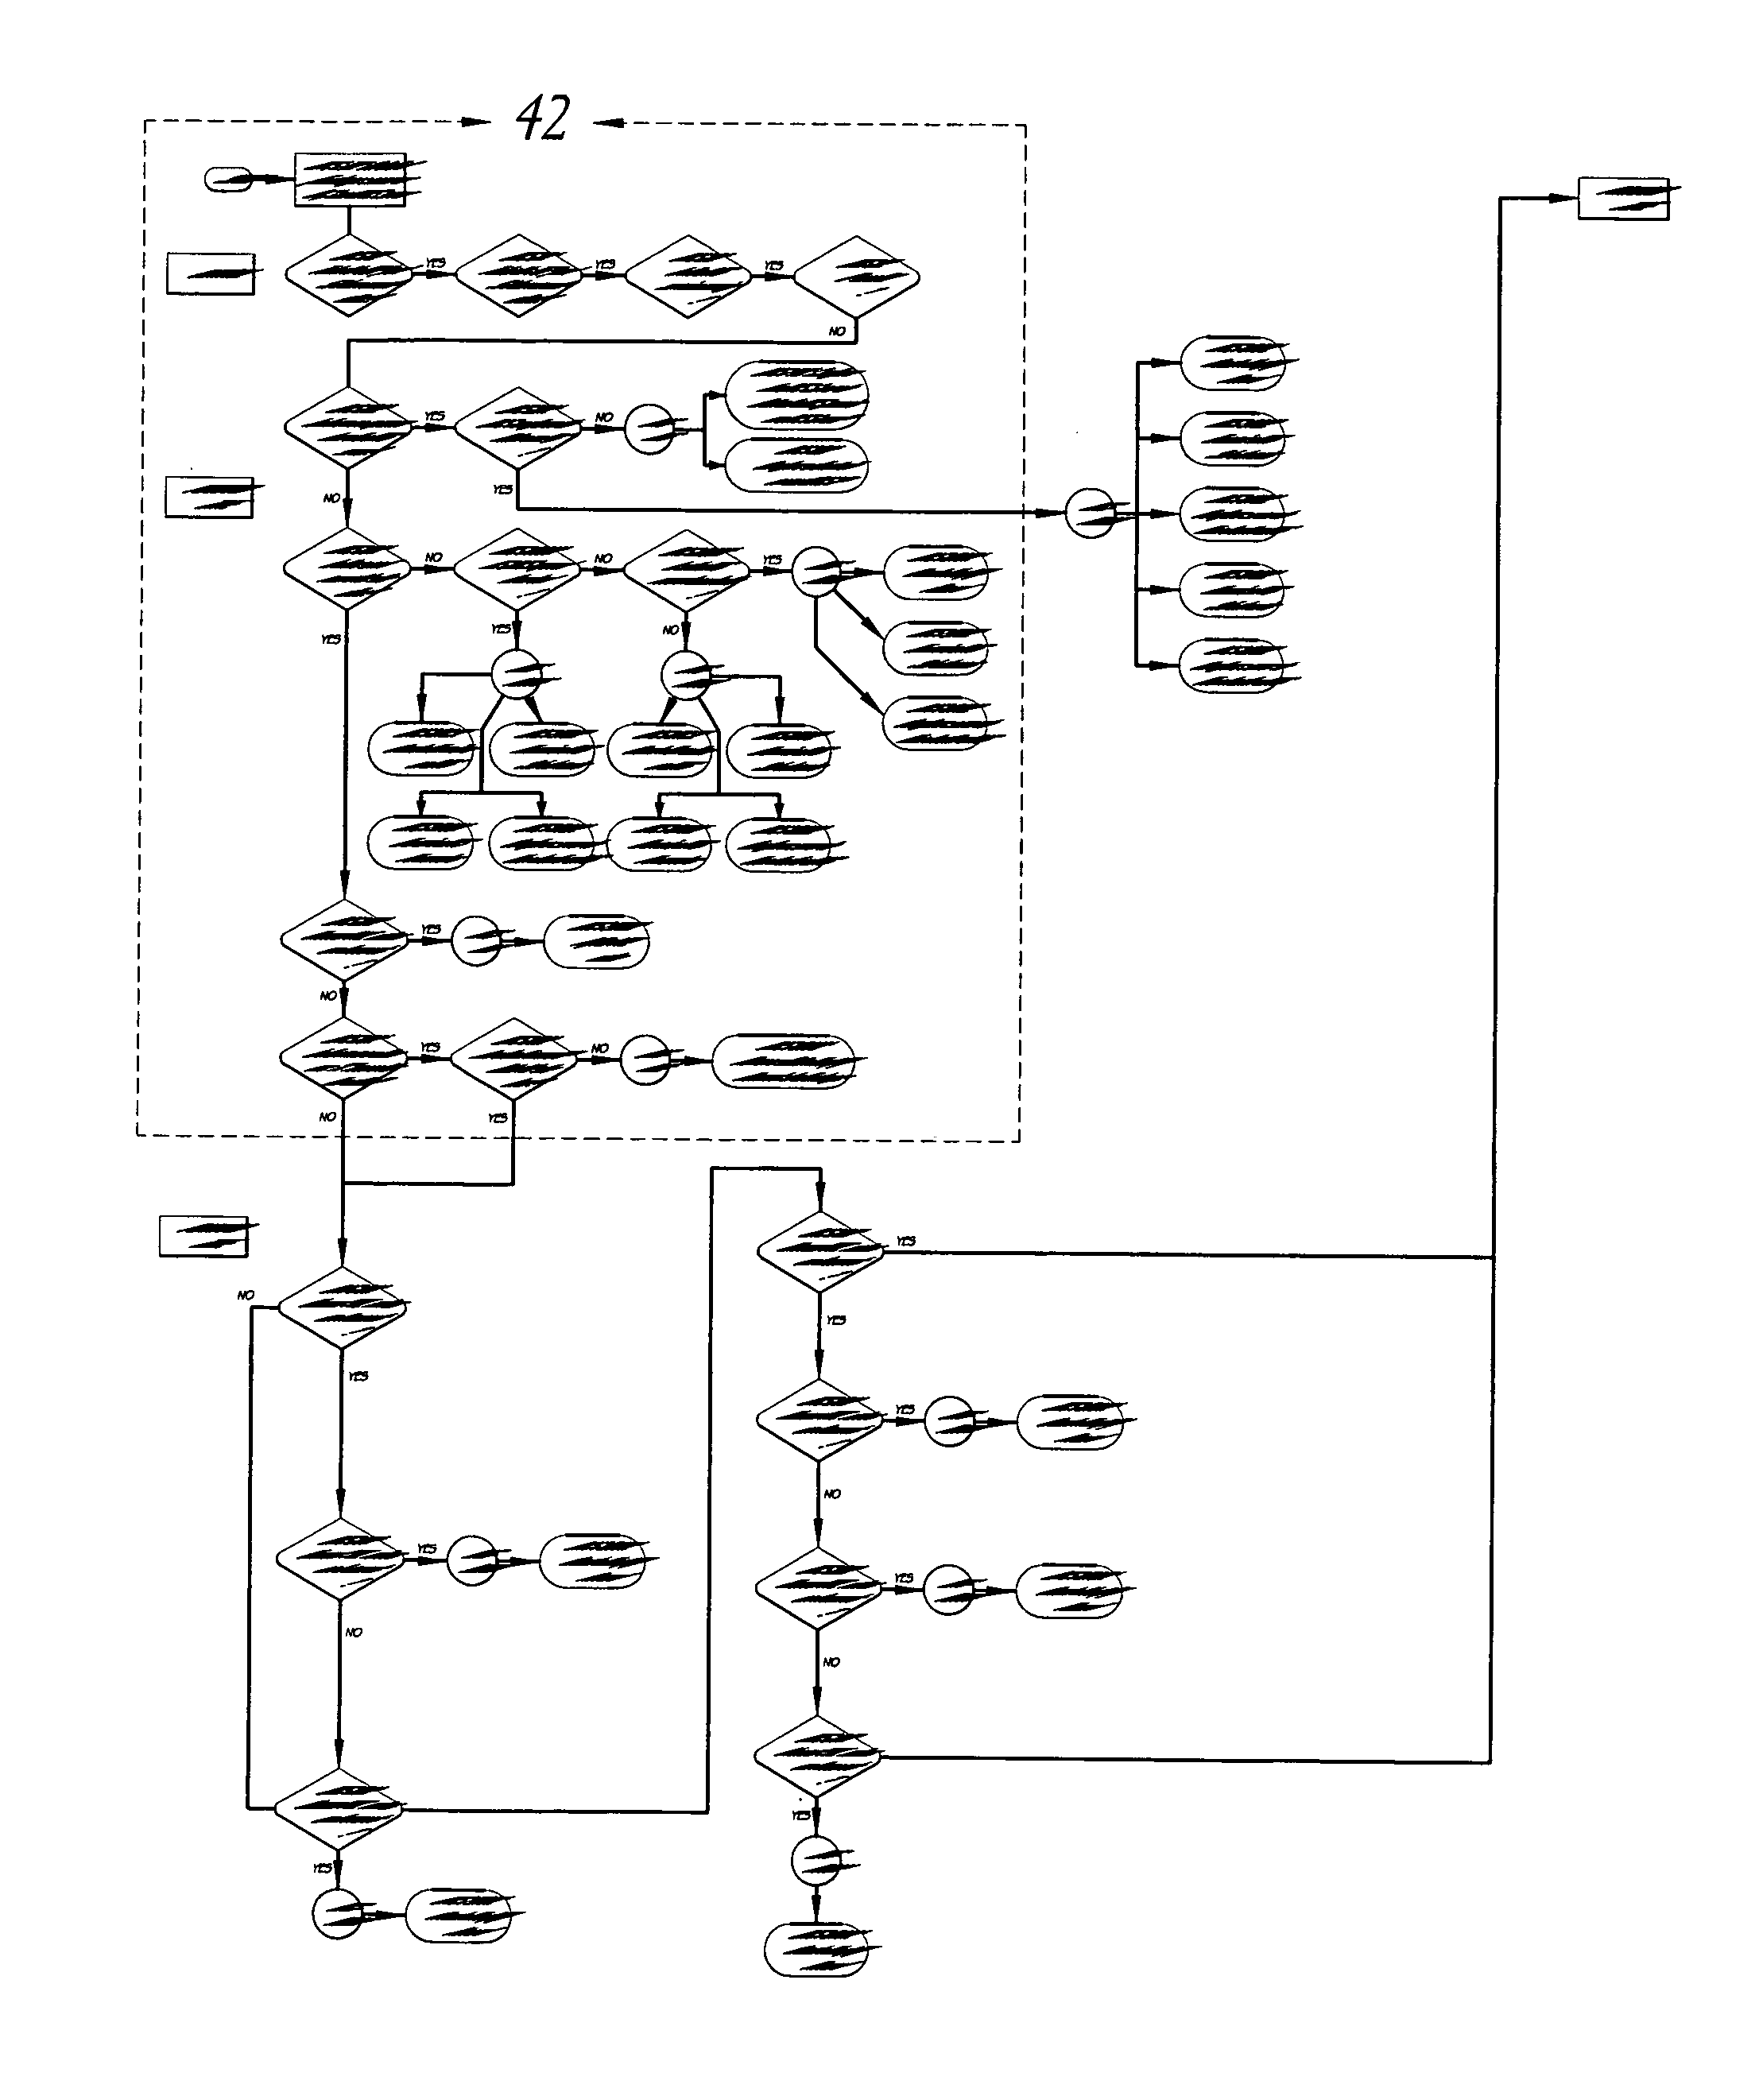 Systems and methods for encoding knowledge for automated management of software application deployments